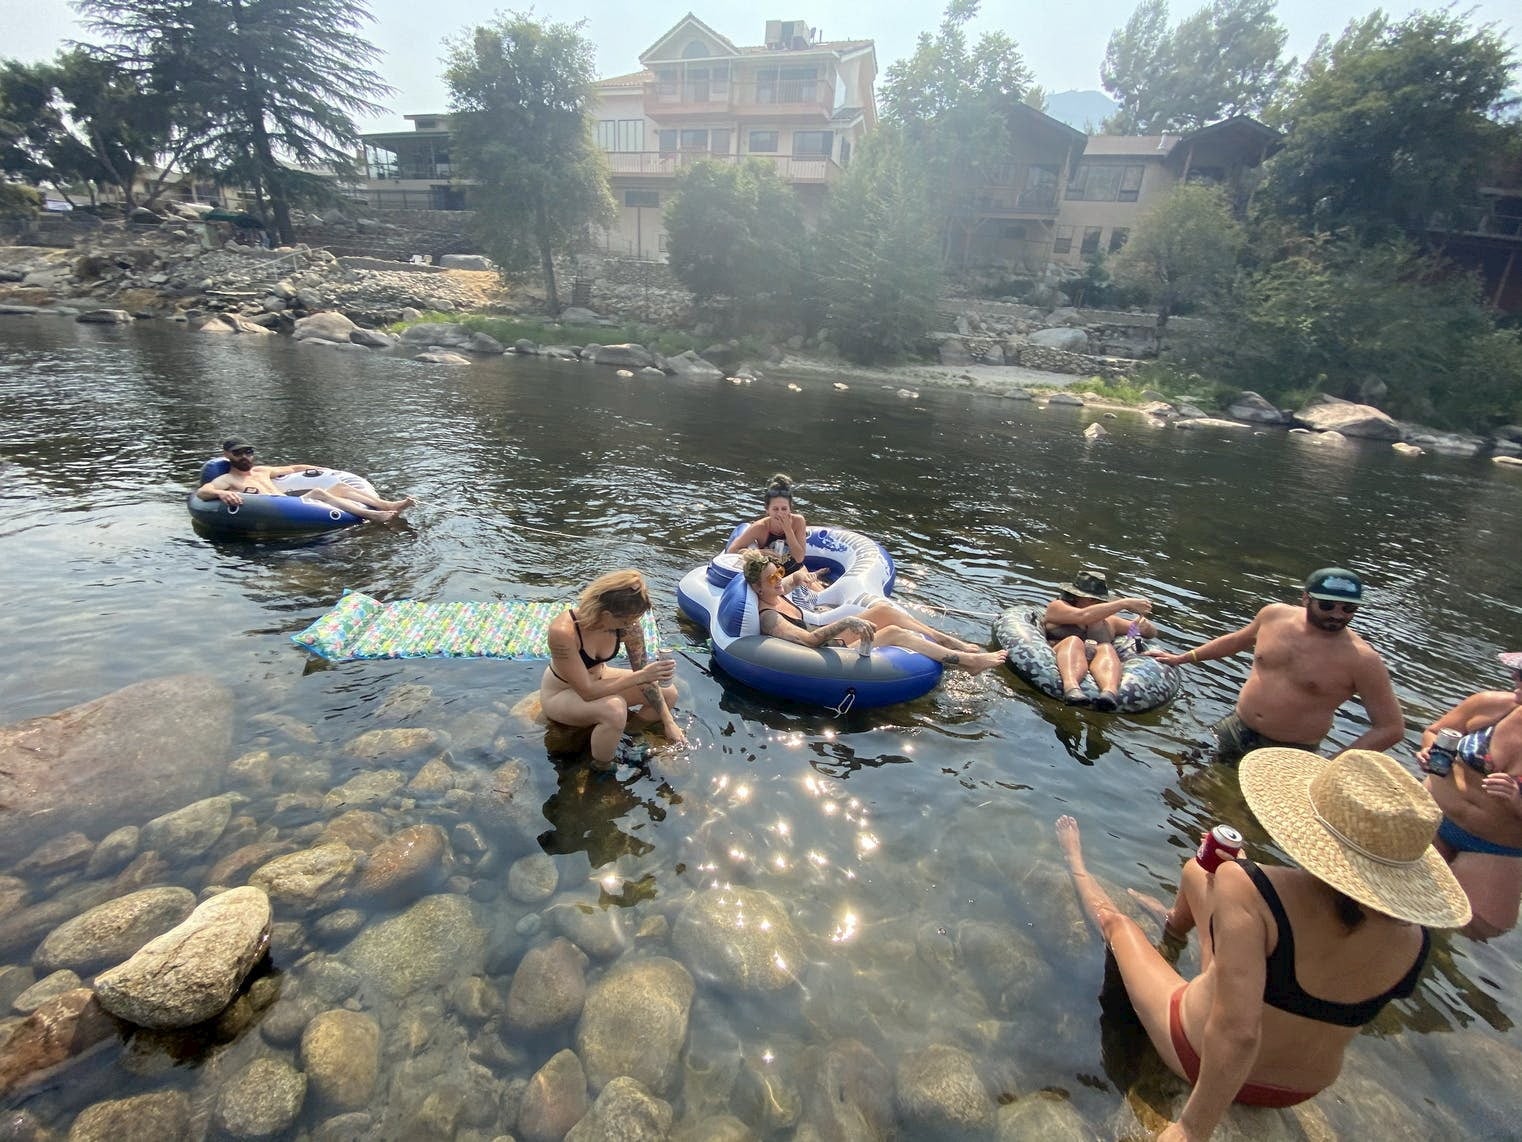 Group of friends hanging out in tubes in a river in California.